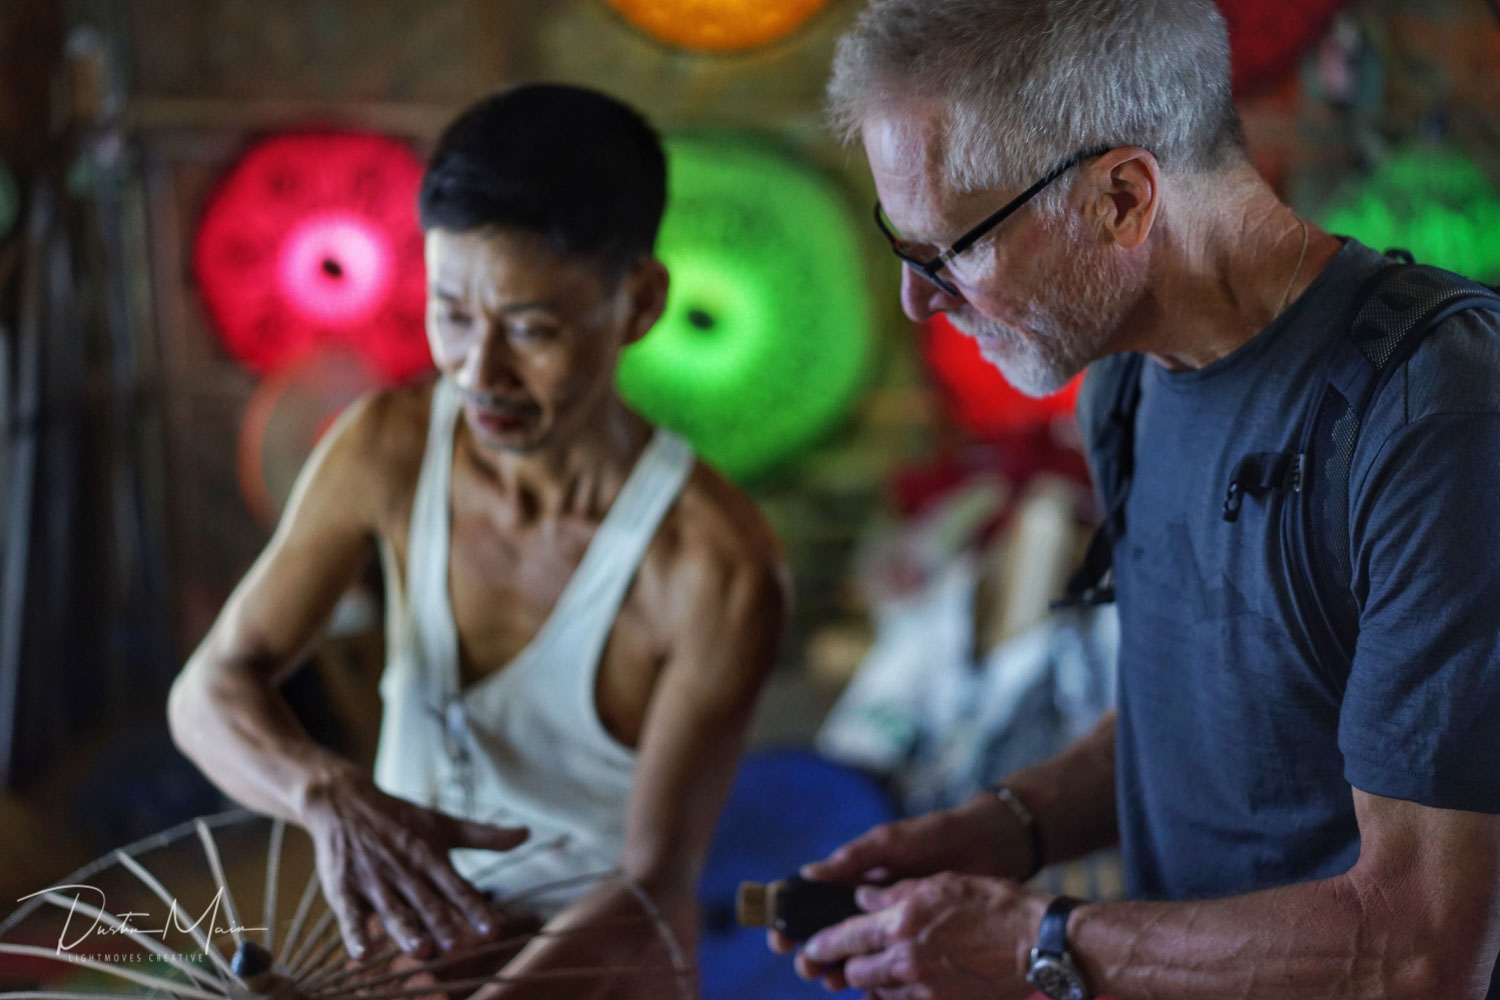 Learn about the traditions from the artisans themselves